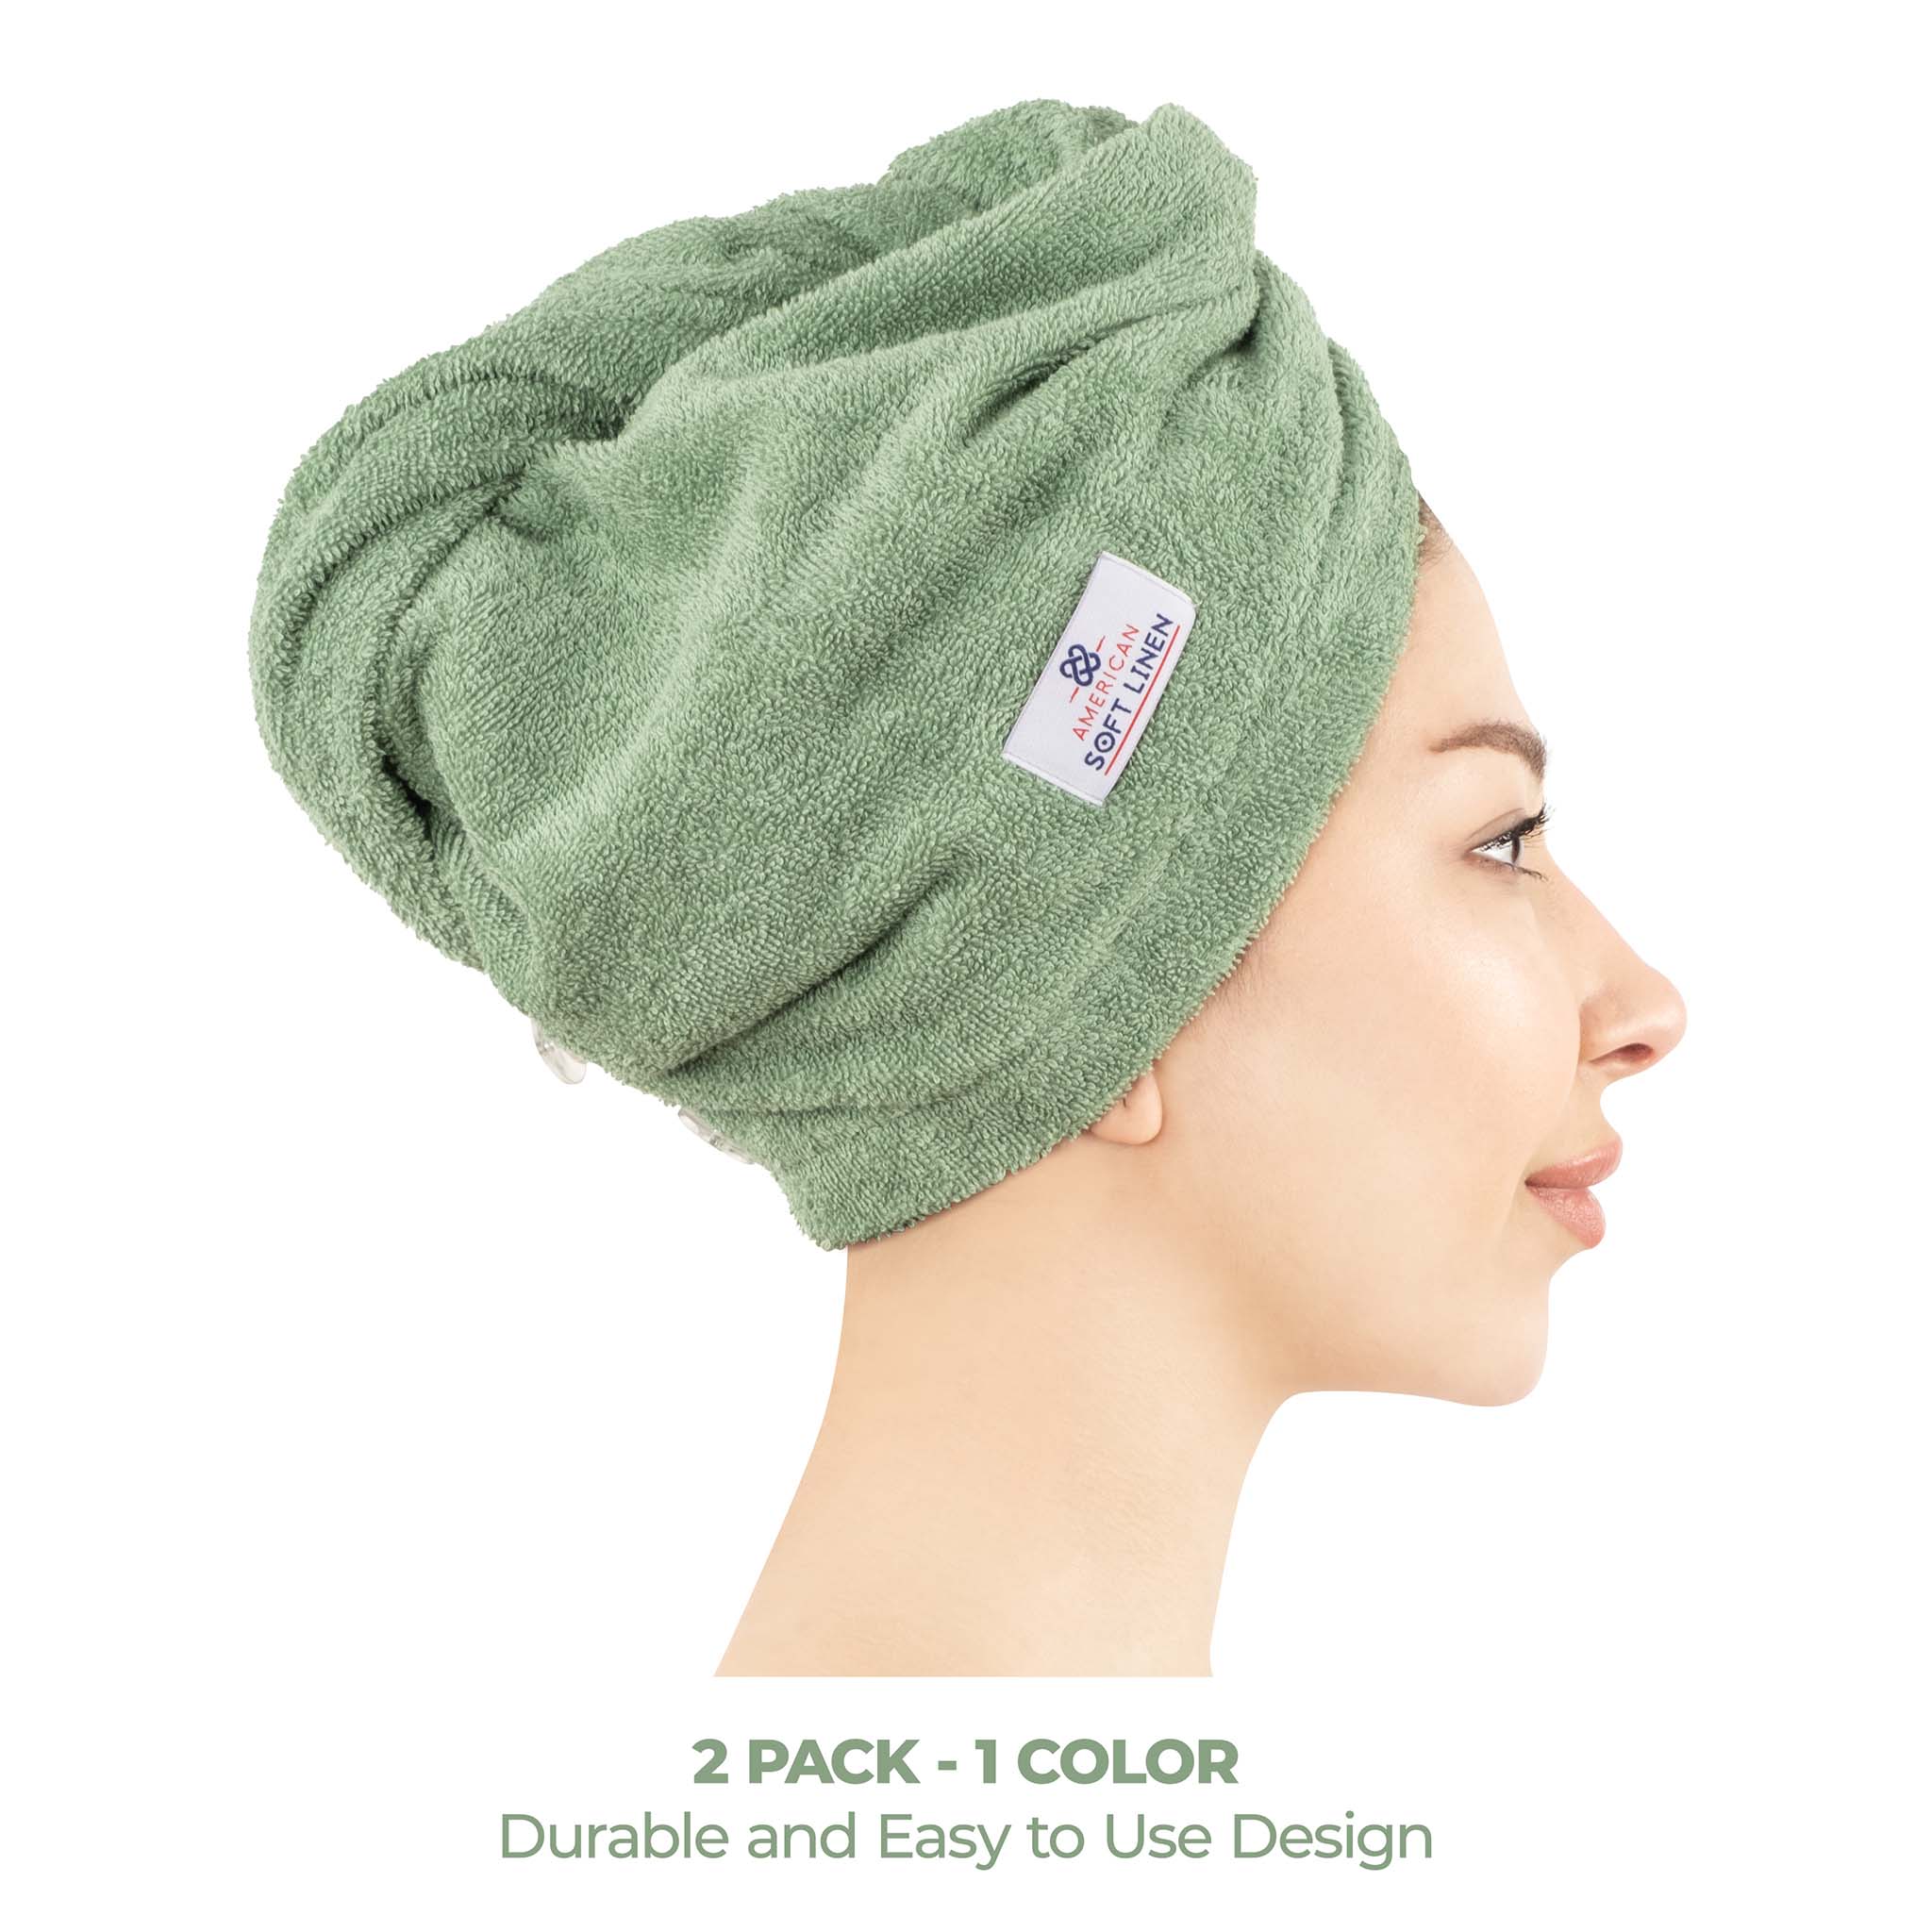 American Soft Linen 100% Cotton Hair Drying Towels for Women 2 pack 75 set case pack sage-green-2